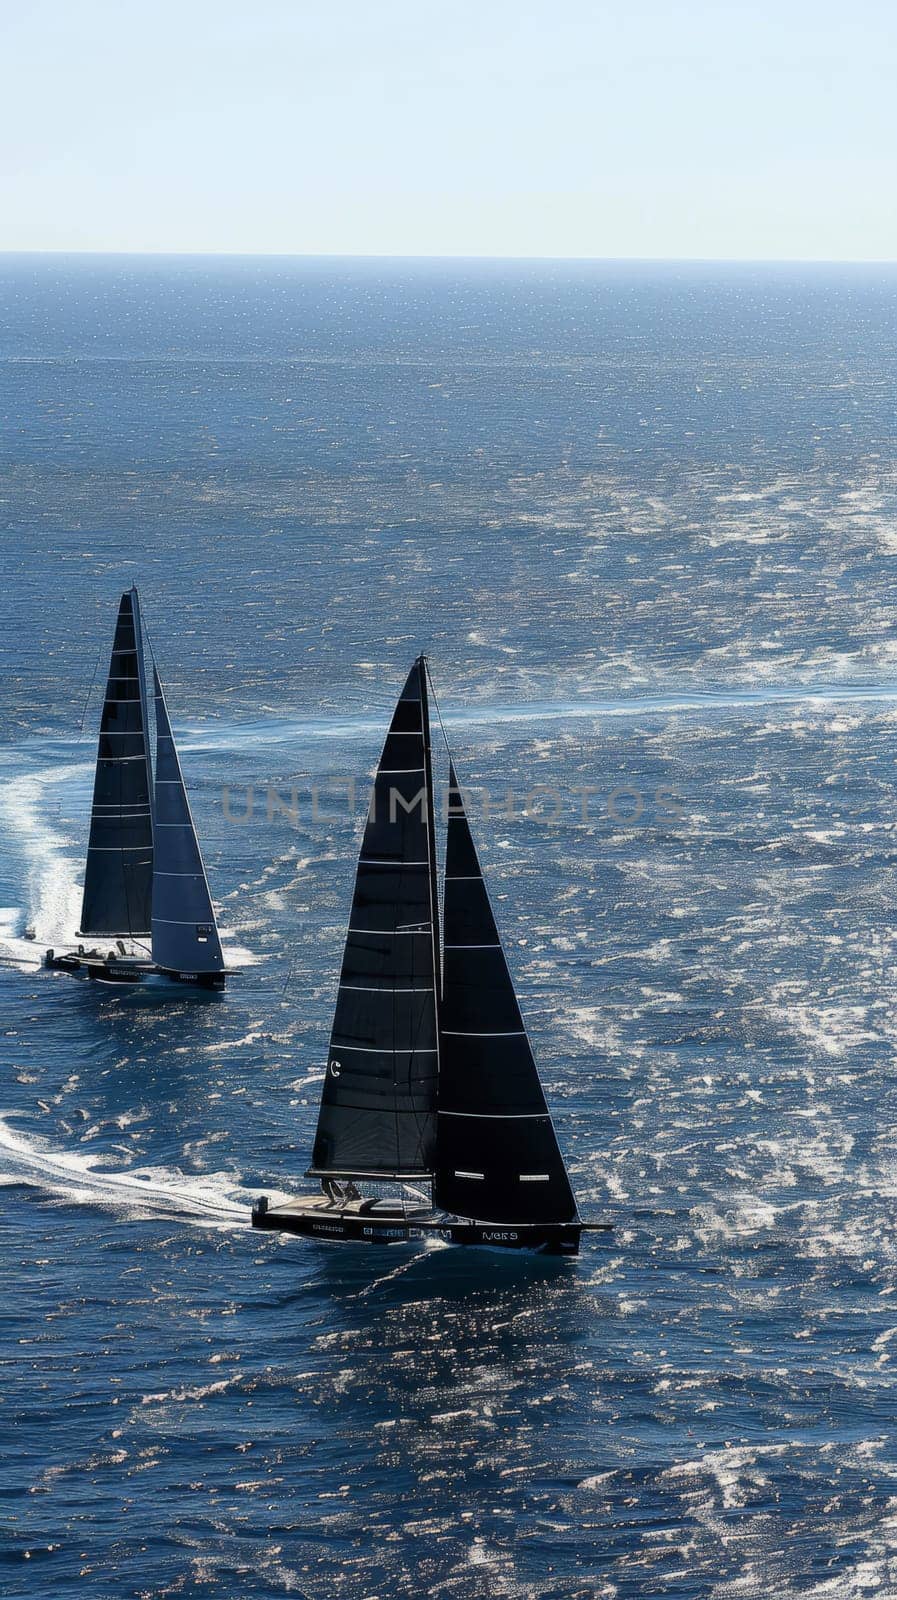 High-speed racing sailboats slice through the ocean waves, their sails billowing in the wind during a competitive regatta. by sfinks